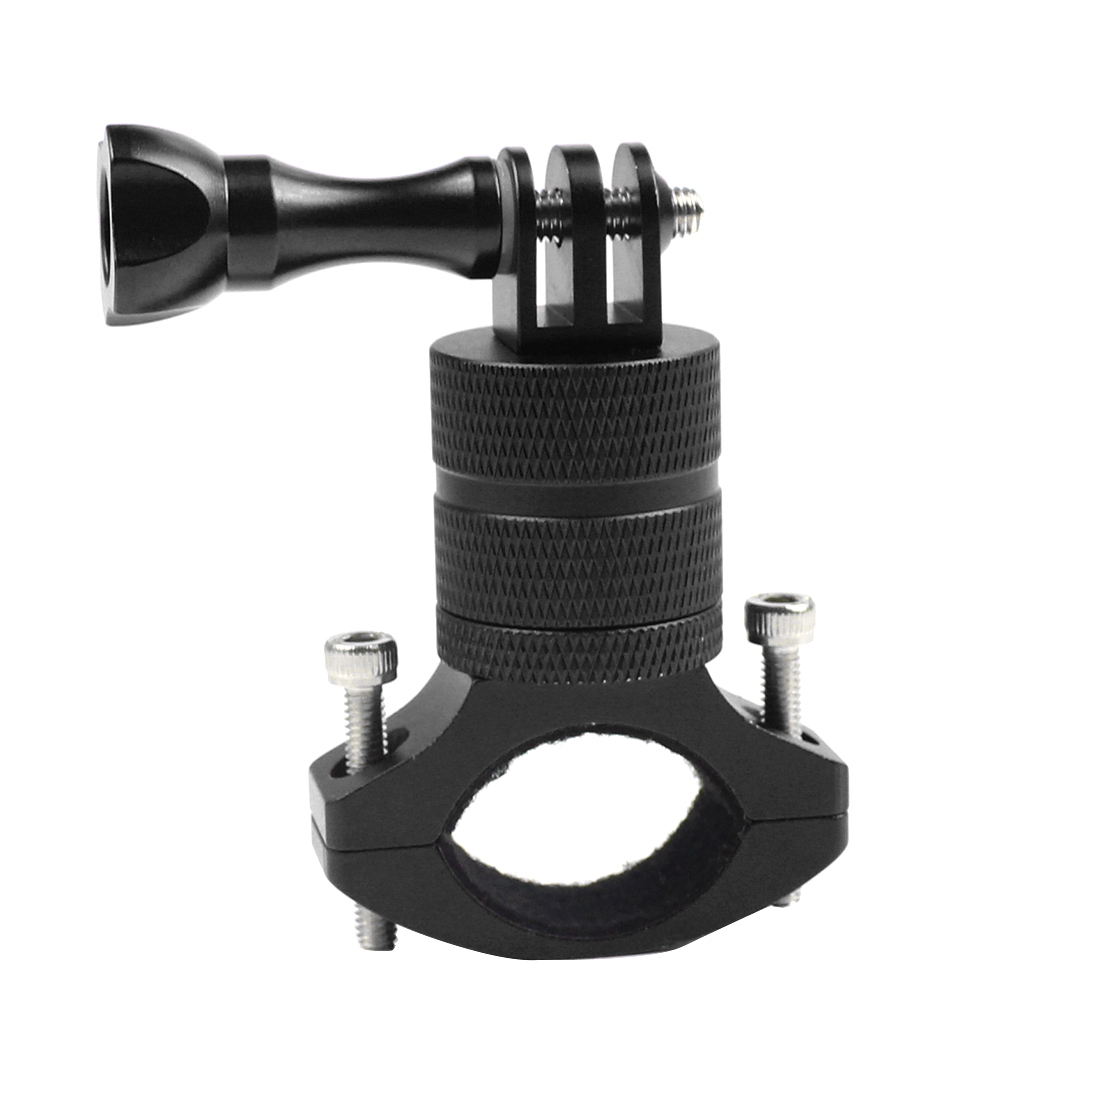 BGNing Aluminum Alloy Bicycle Clip 360° Rotating Clamp for GoPro 7 / 8 / Max Action Camera